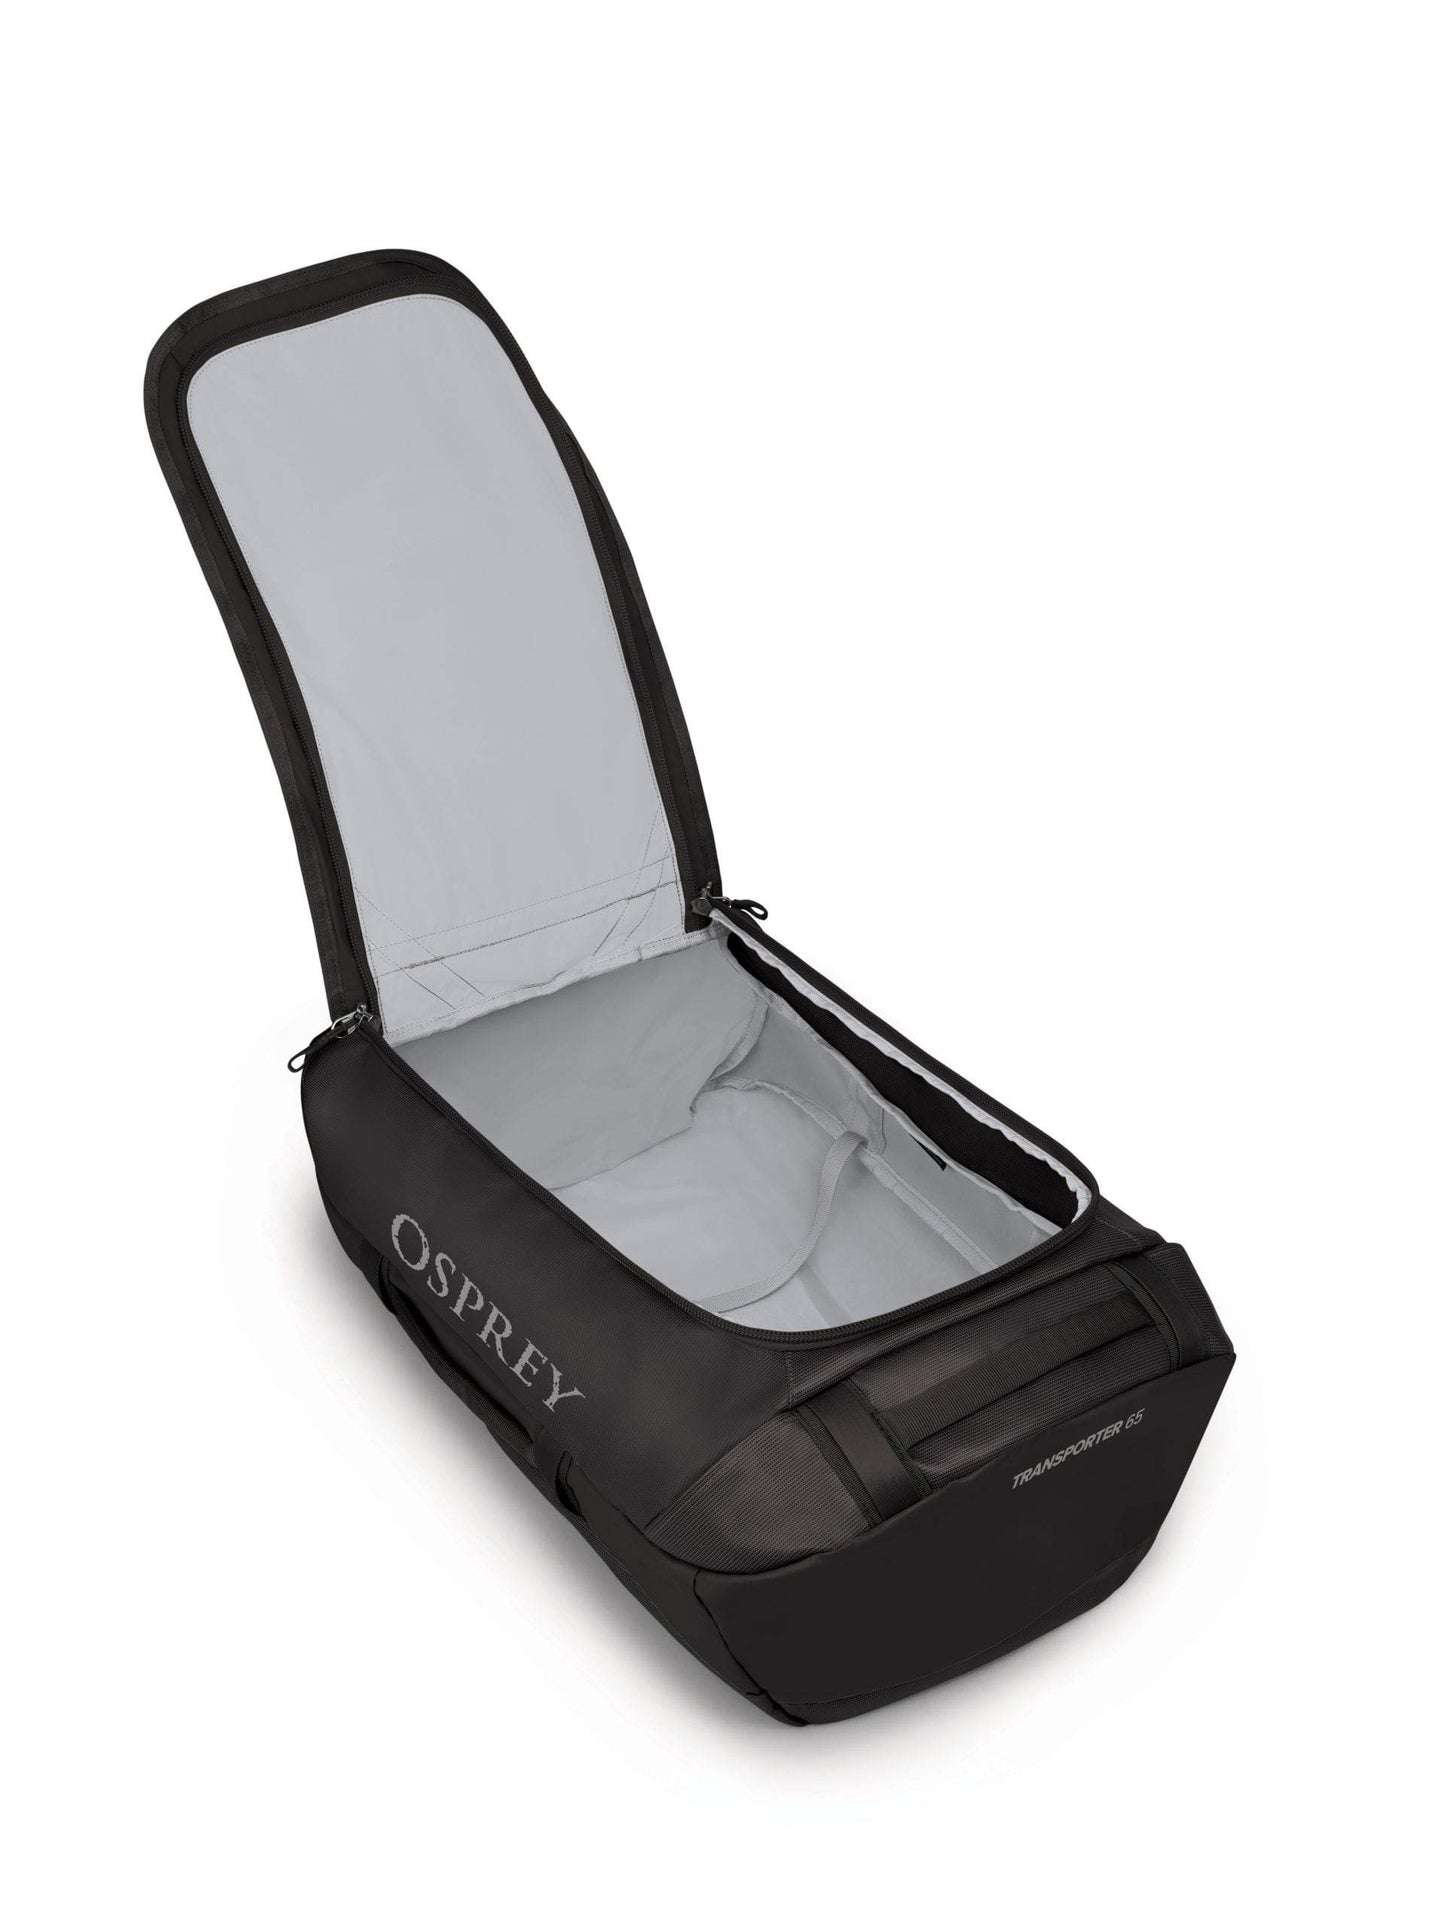 Osprey Transporter 65 Duffel Bag - The Luxury Promotional Gifts Company Limited